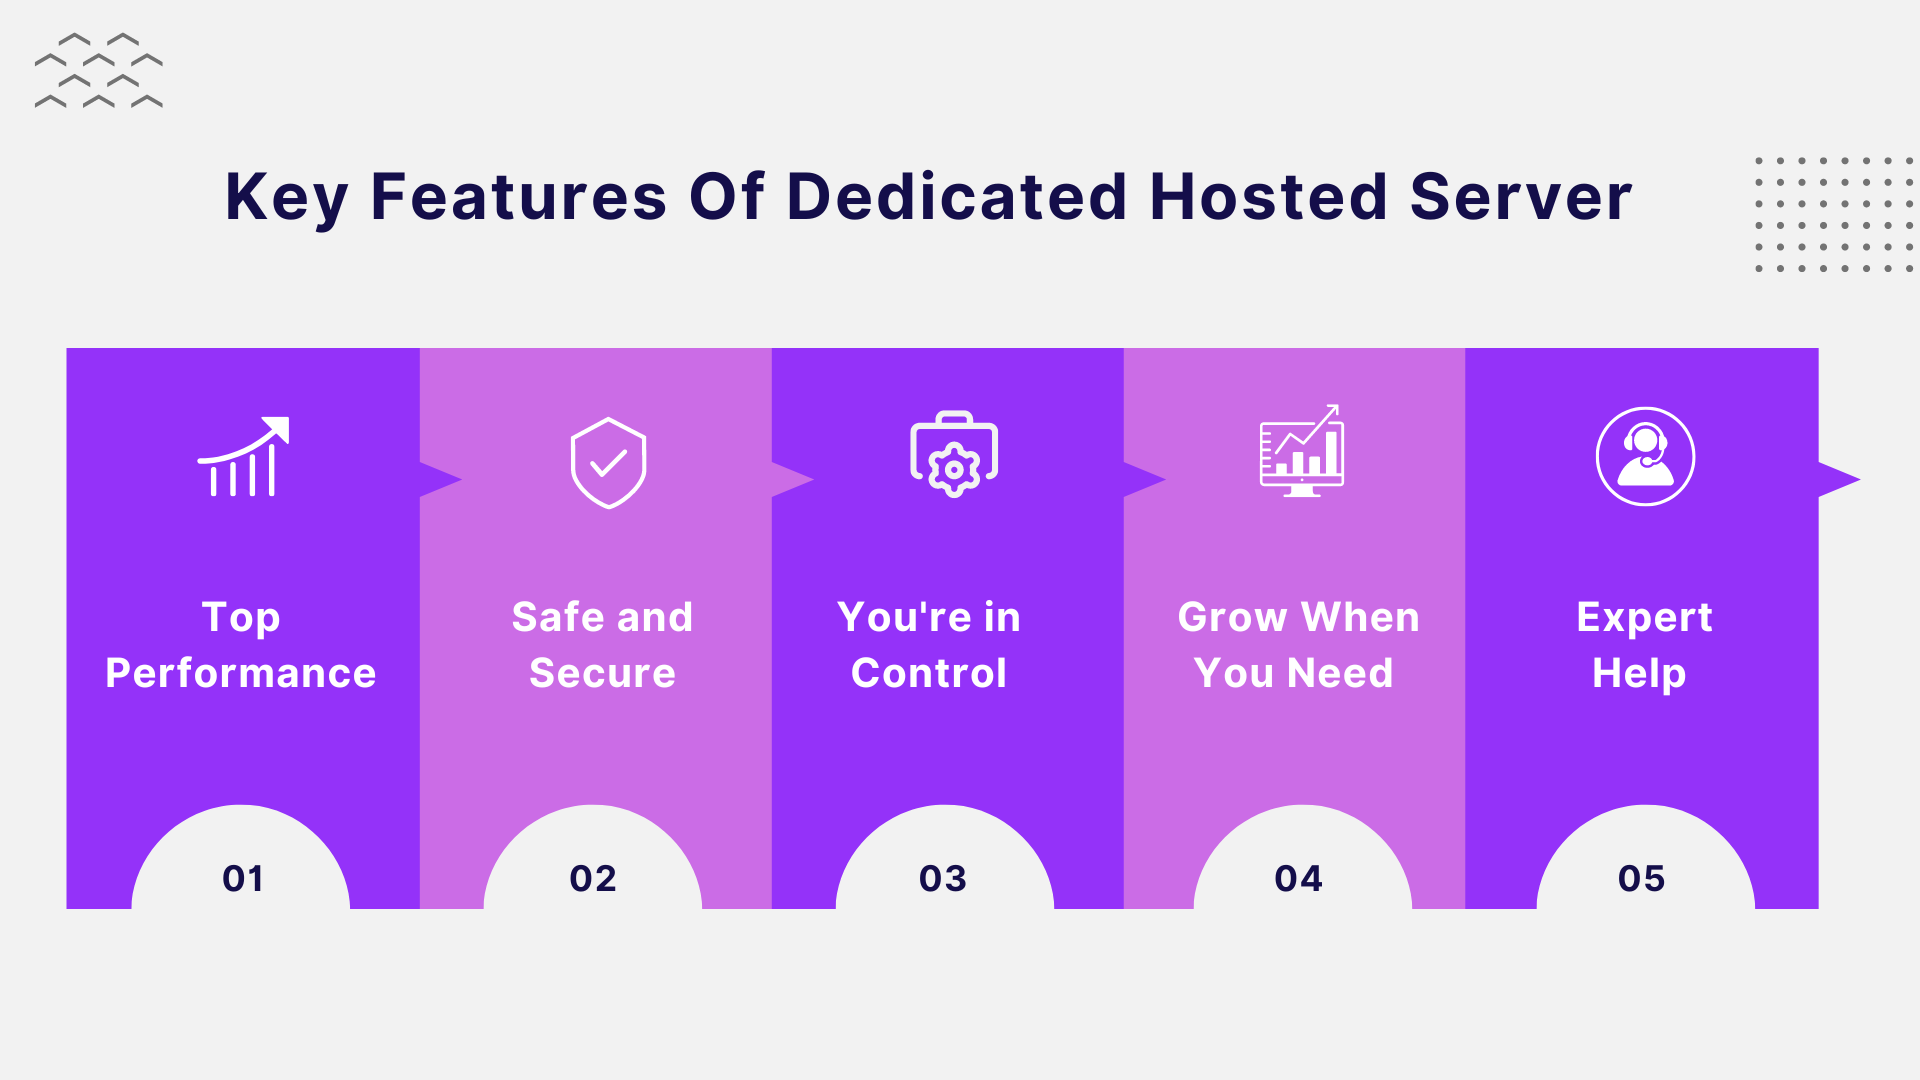 Key Features Of Dedicated Hosted Server